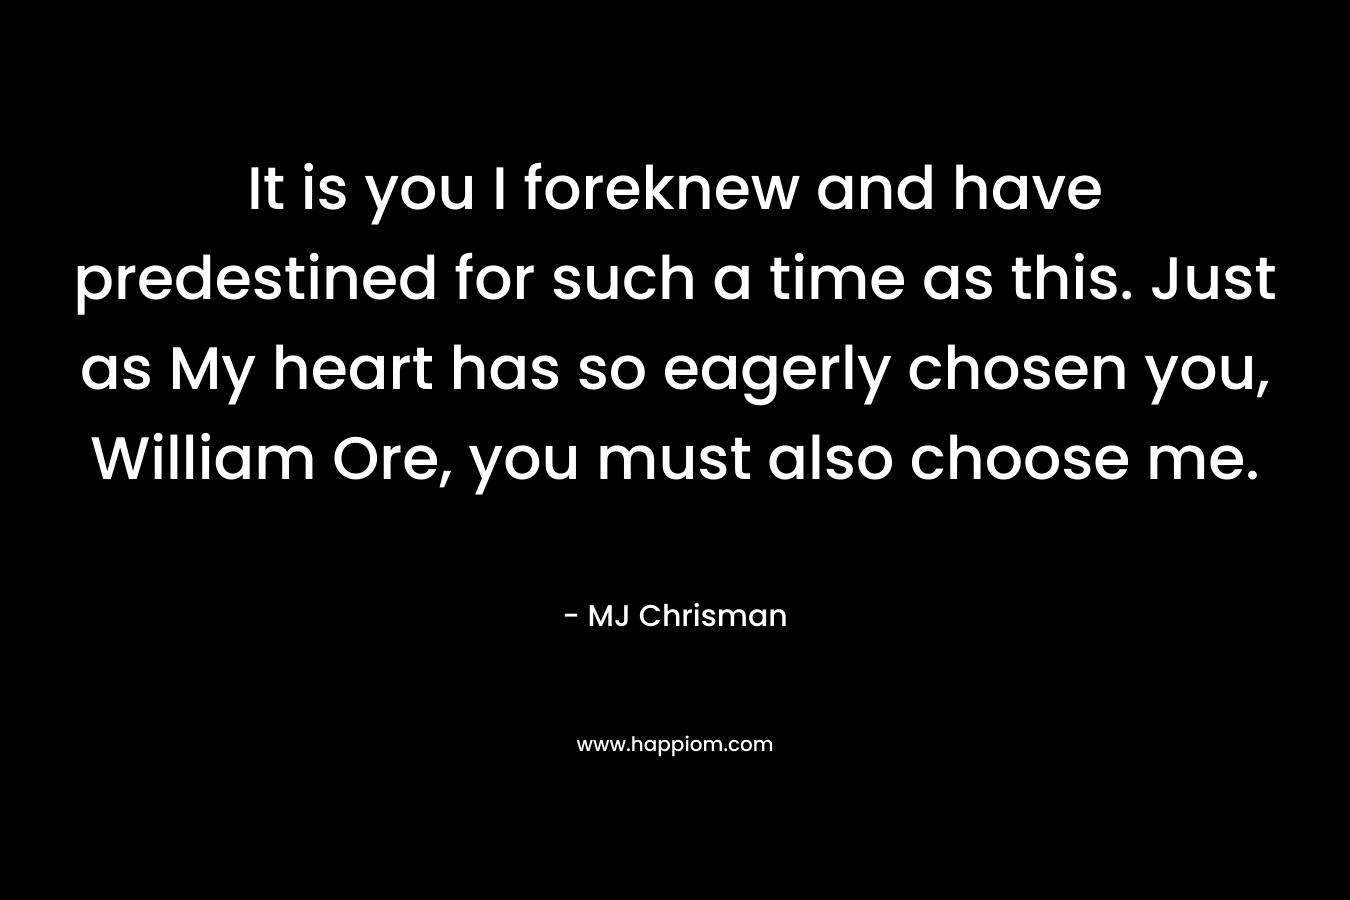 It is you I foreknew and have predestined for such a time as this. Just as My heart has so eagerly chosen you, William Ore, you must also choose me.